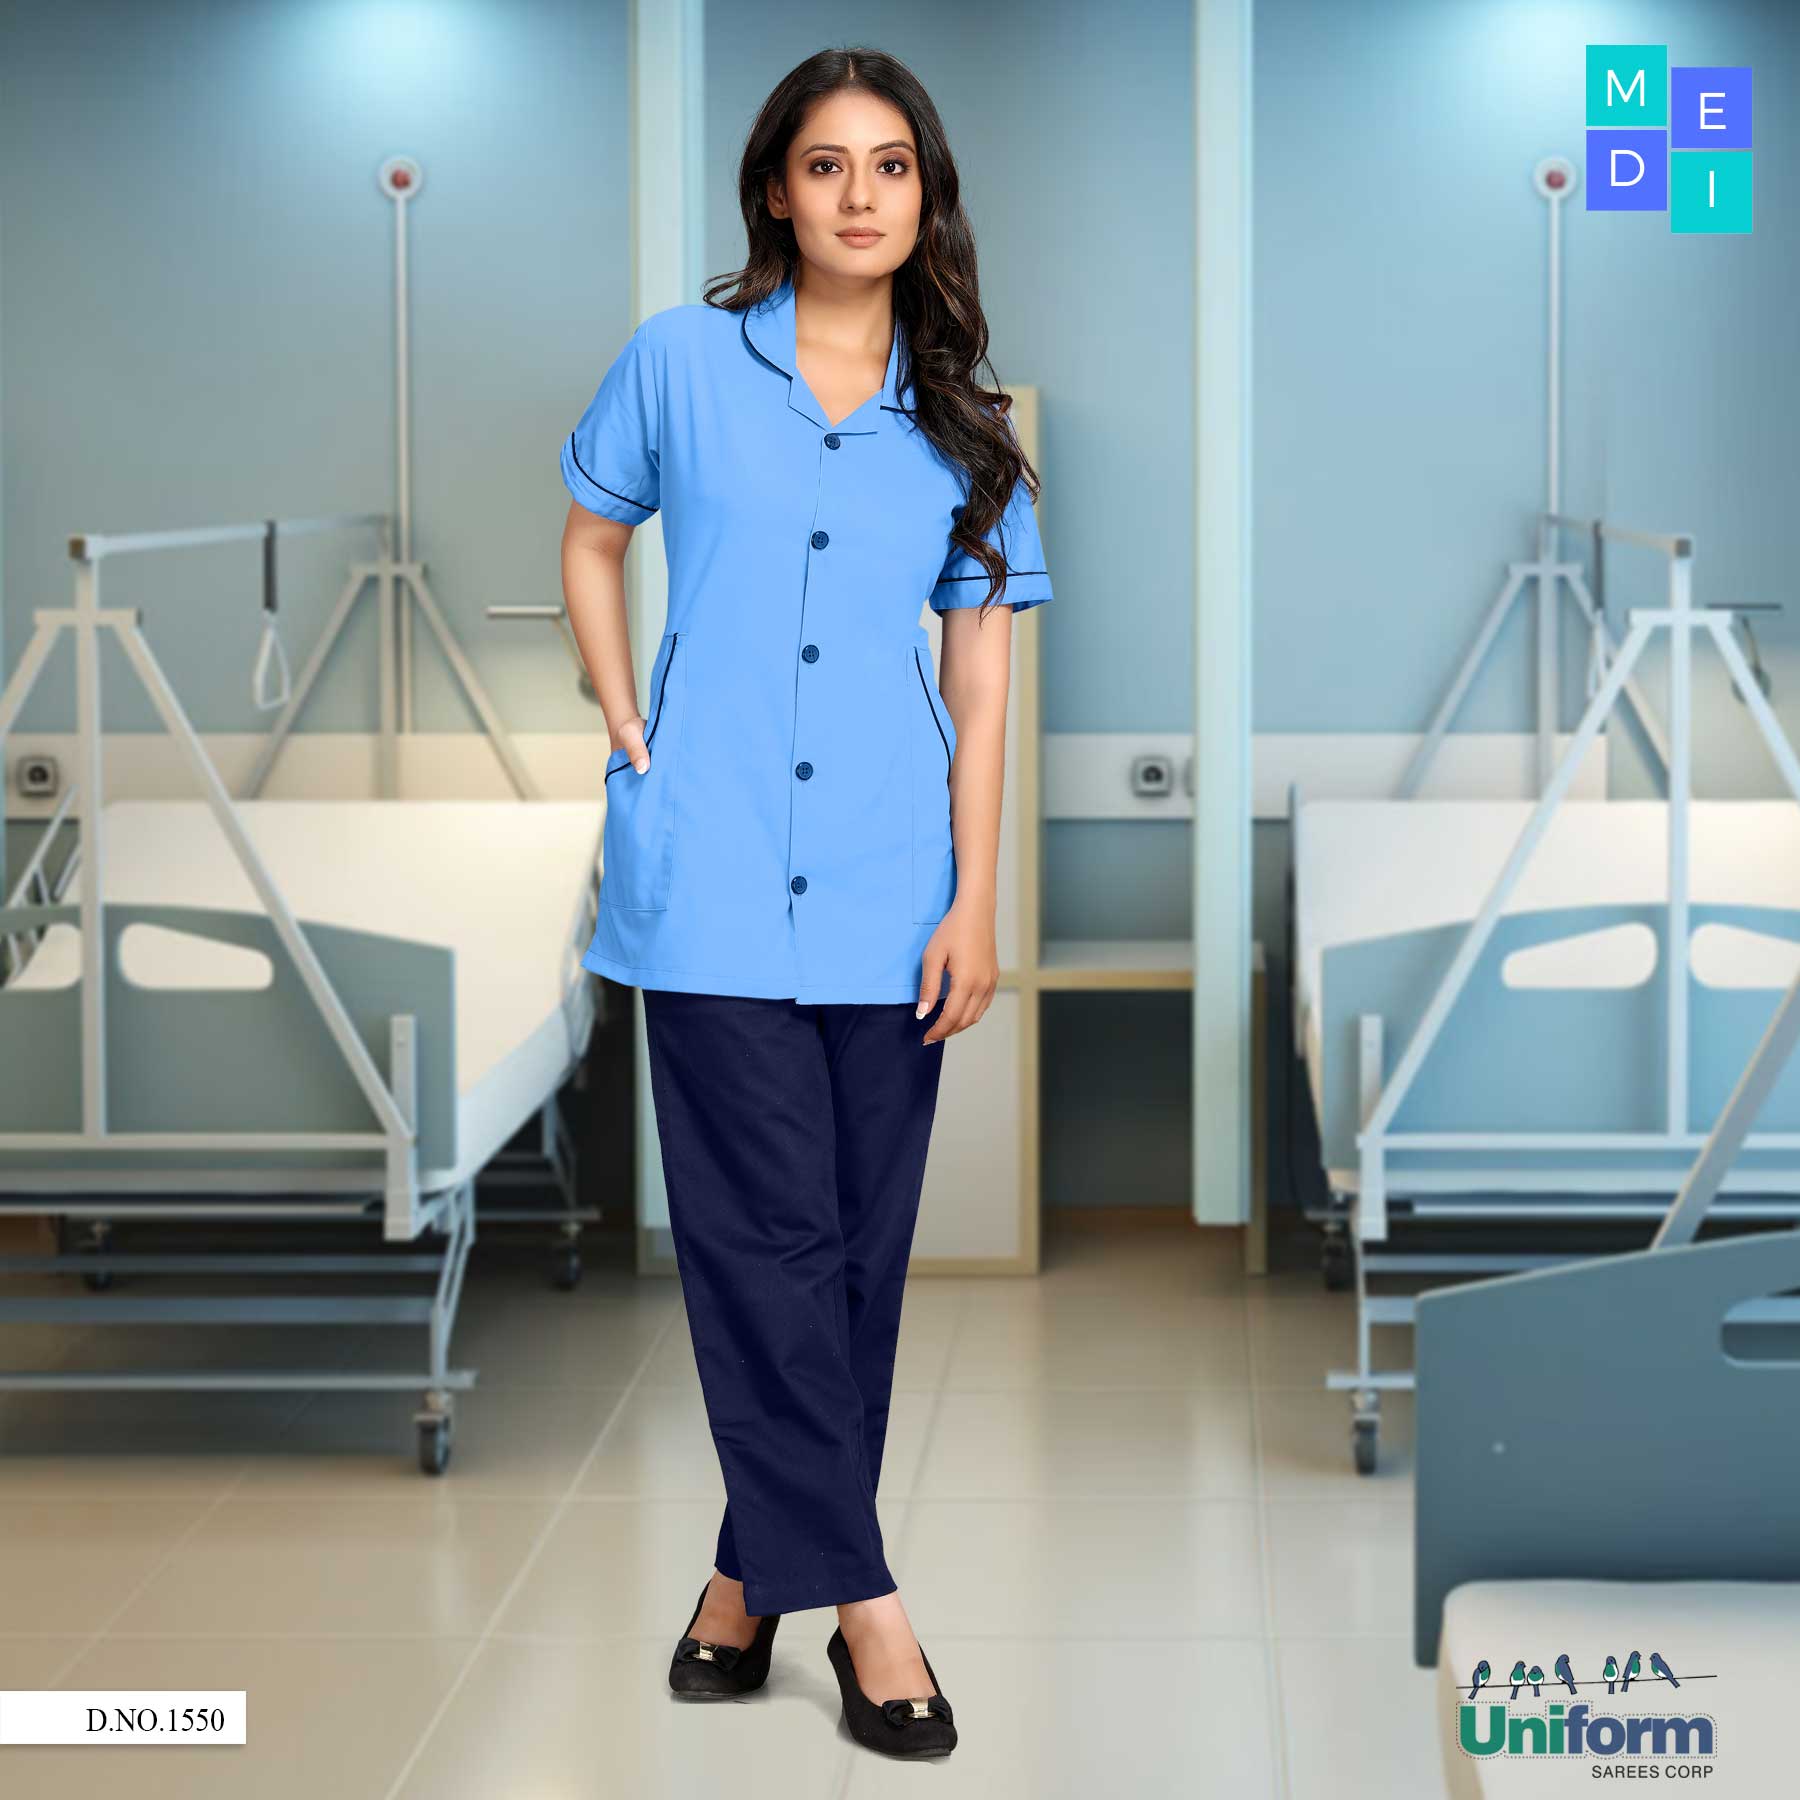 The Science Behind Nurse Uniforms and Dress Code | Ultimate Medical Academy